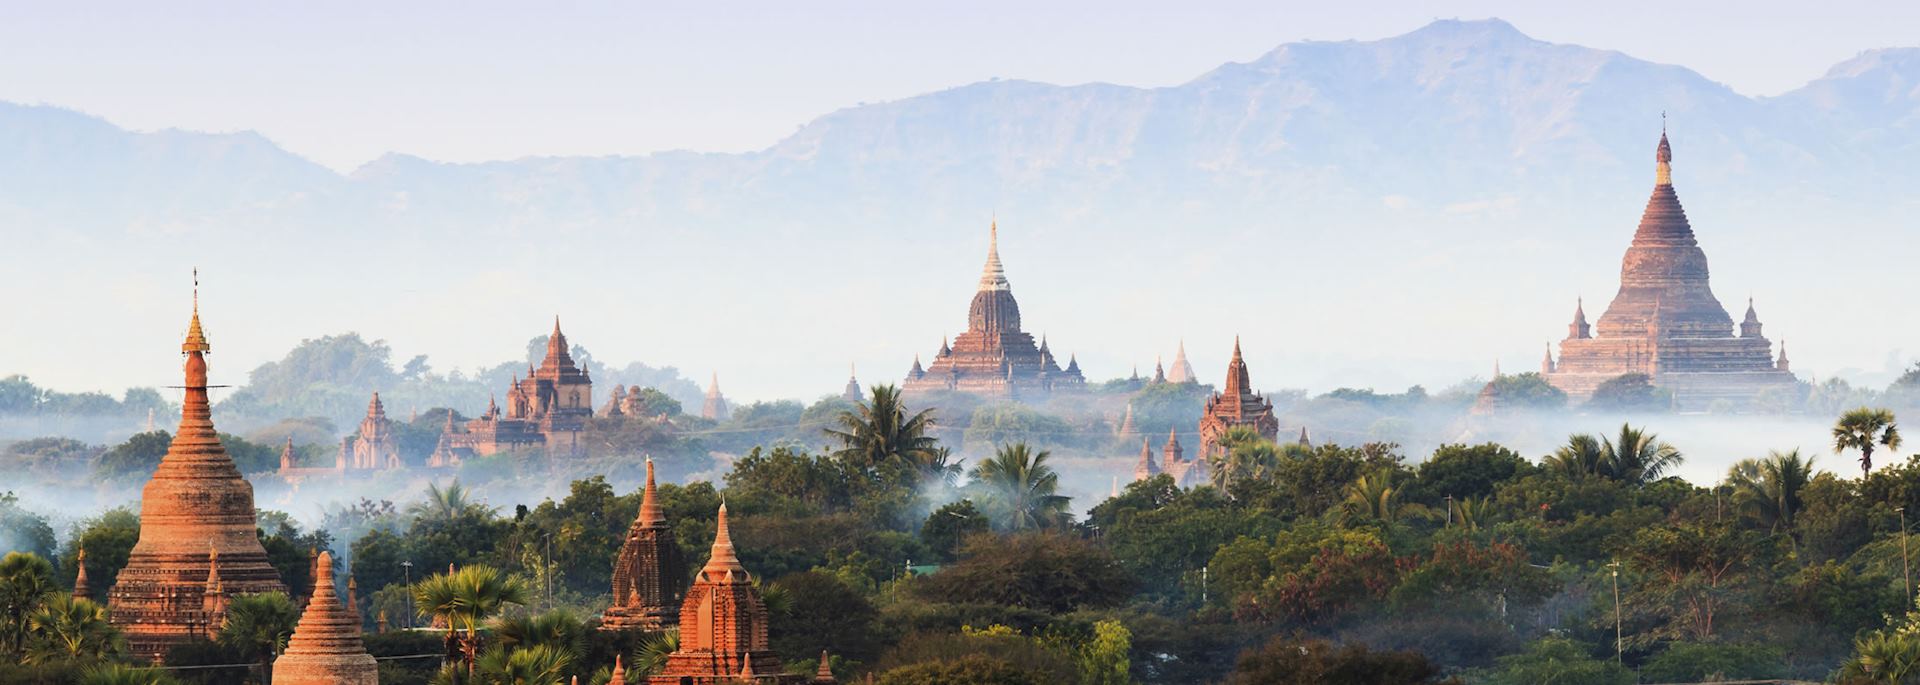 The temples of Bagan